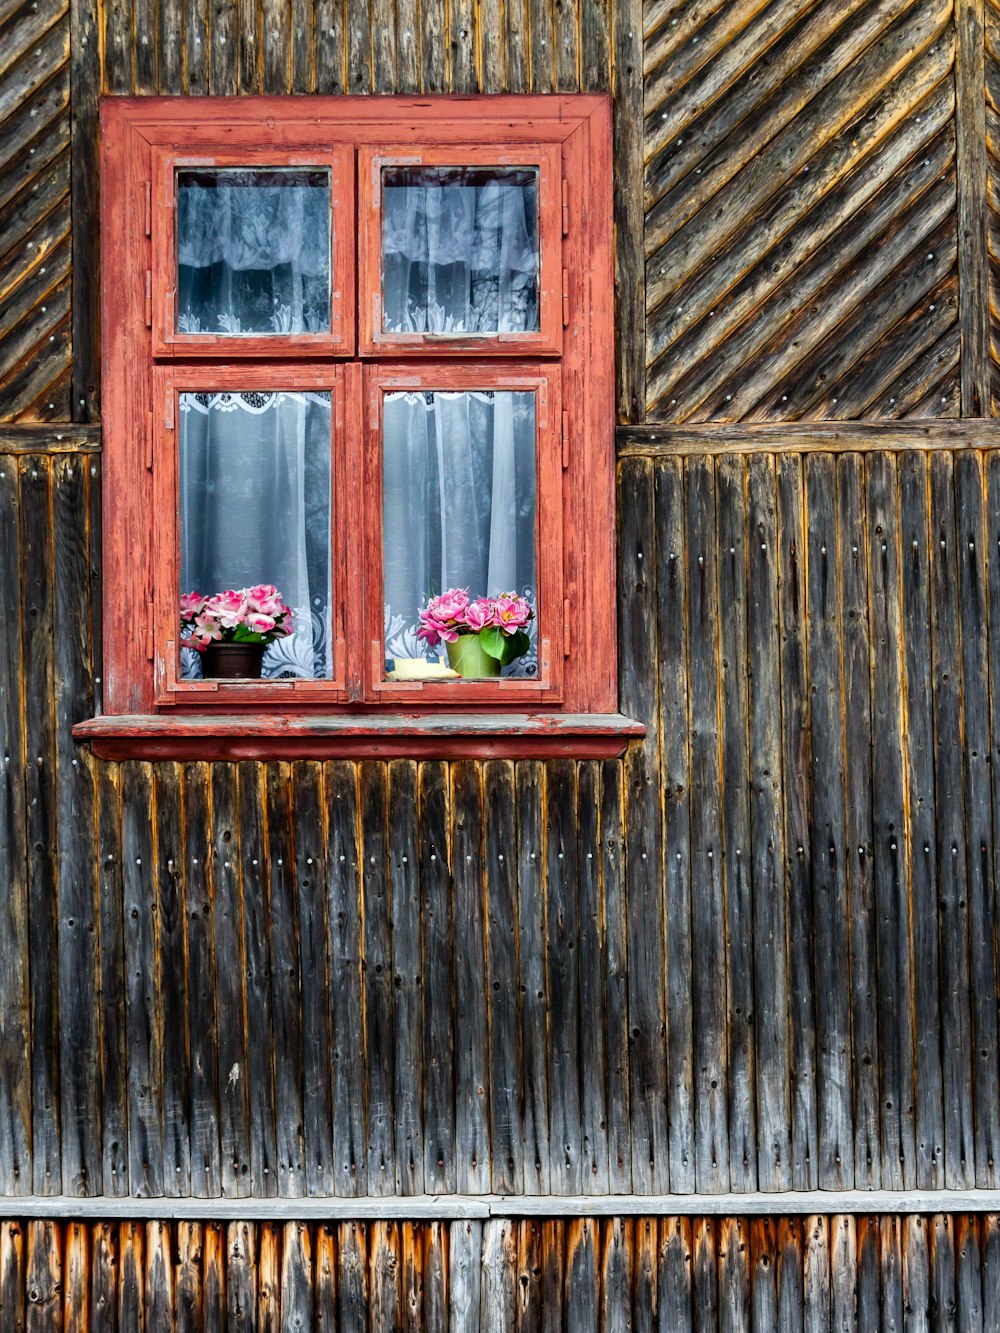 a wooden wall with a red window and flowers in the window